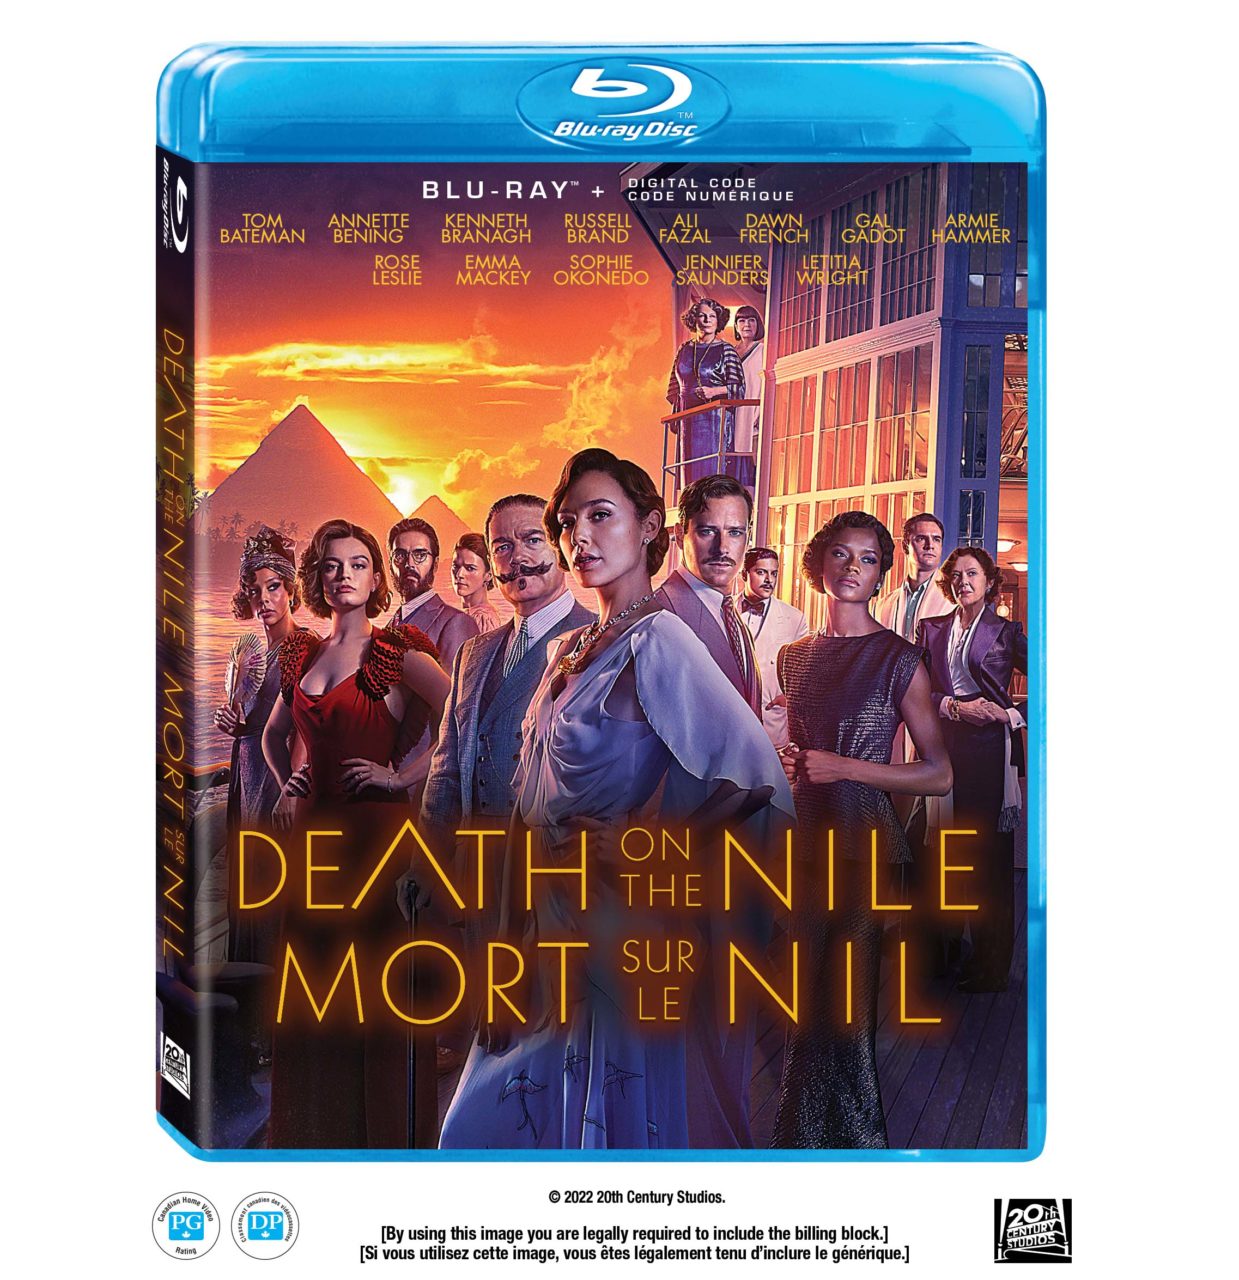 Death On The Nile Blu-Ray Combo Pack cover (Walt Disney Studios Home Entertainment)